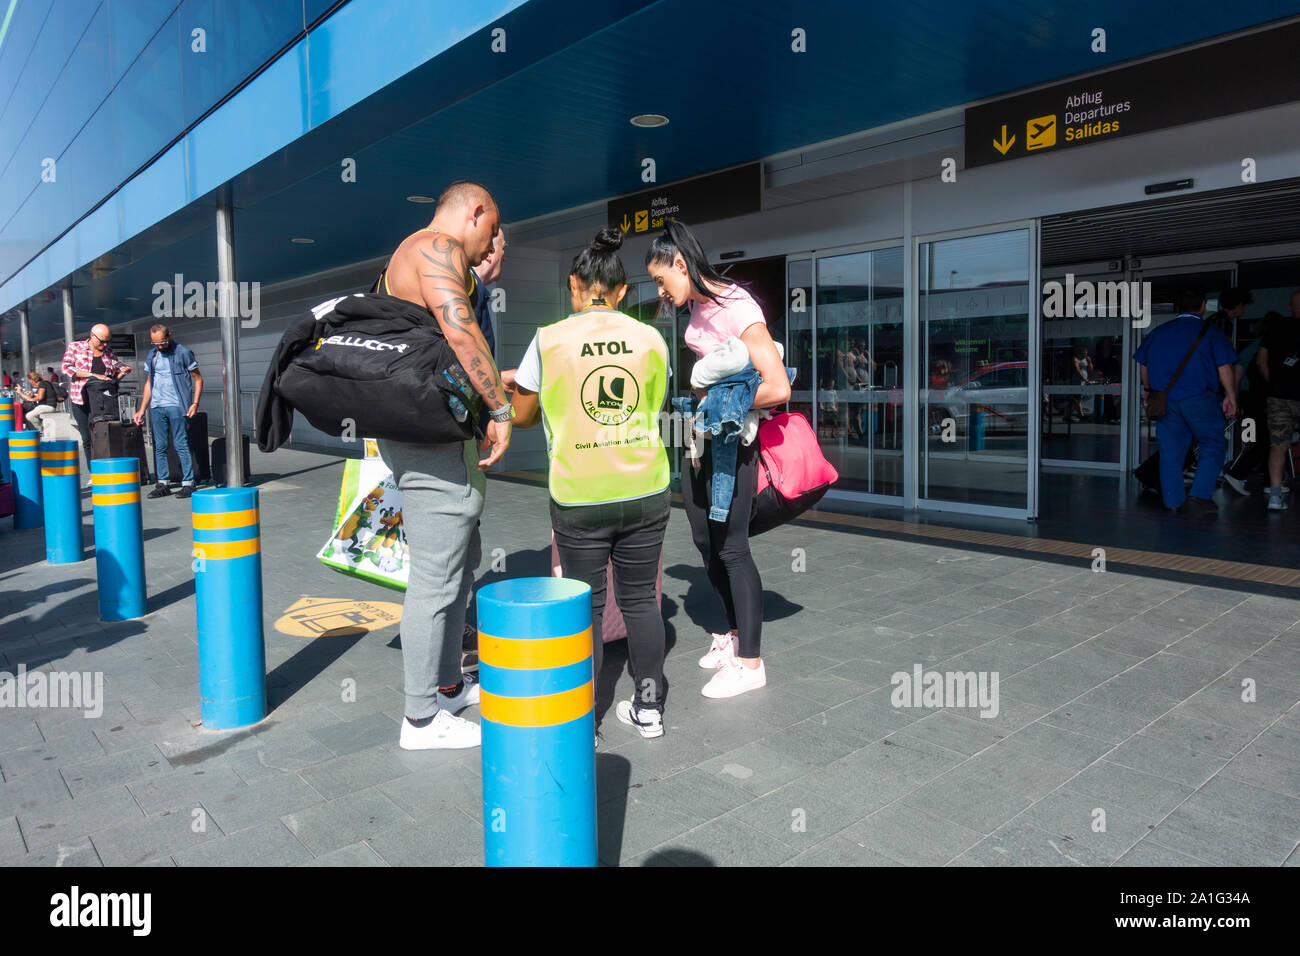 Gran Canaria, Canary Islands, Spain. 26th September, 2019. Thomas Cook customers arrive at Gran Canaria airport, where four repatriation flights to the UK are scheduled for Thursday night (26th September). Atol staff and British Government officials where at the airport to assist passengers.  Repatriation flights from The Canary Islands will continue into October. Credit: Alan Dawson News/Alamy Live News Stock Photo